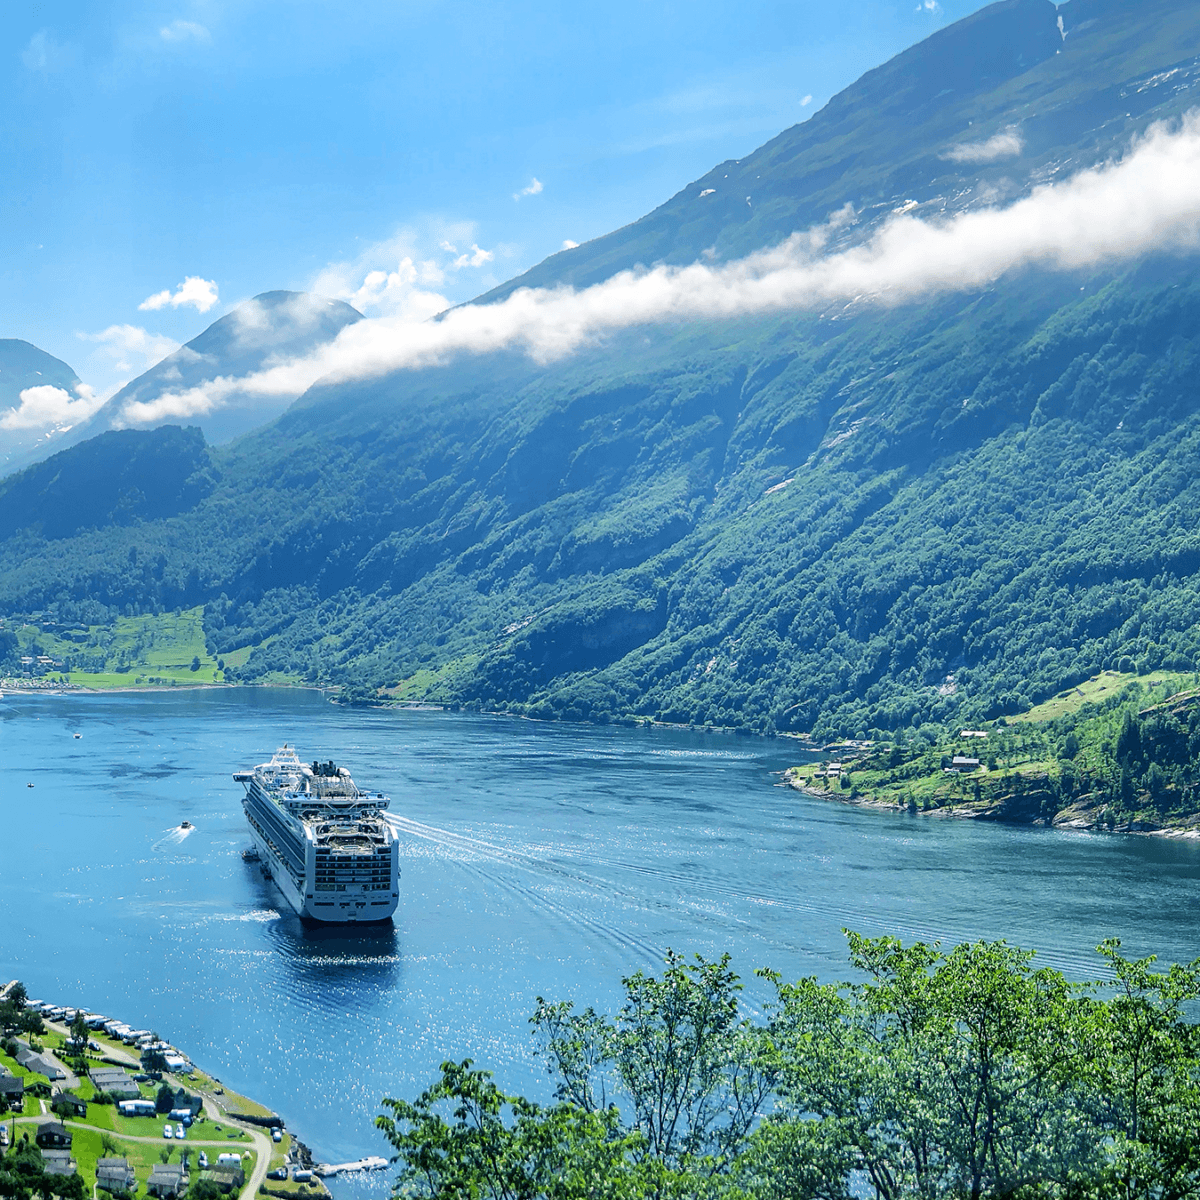 A cruise ship in a Norwegian fjord